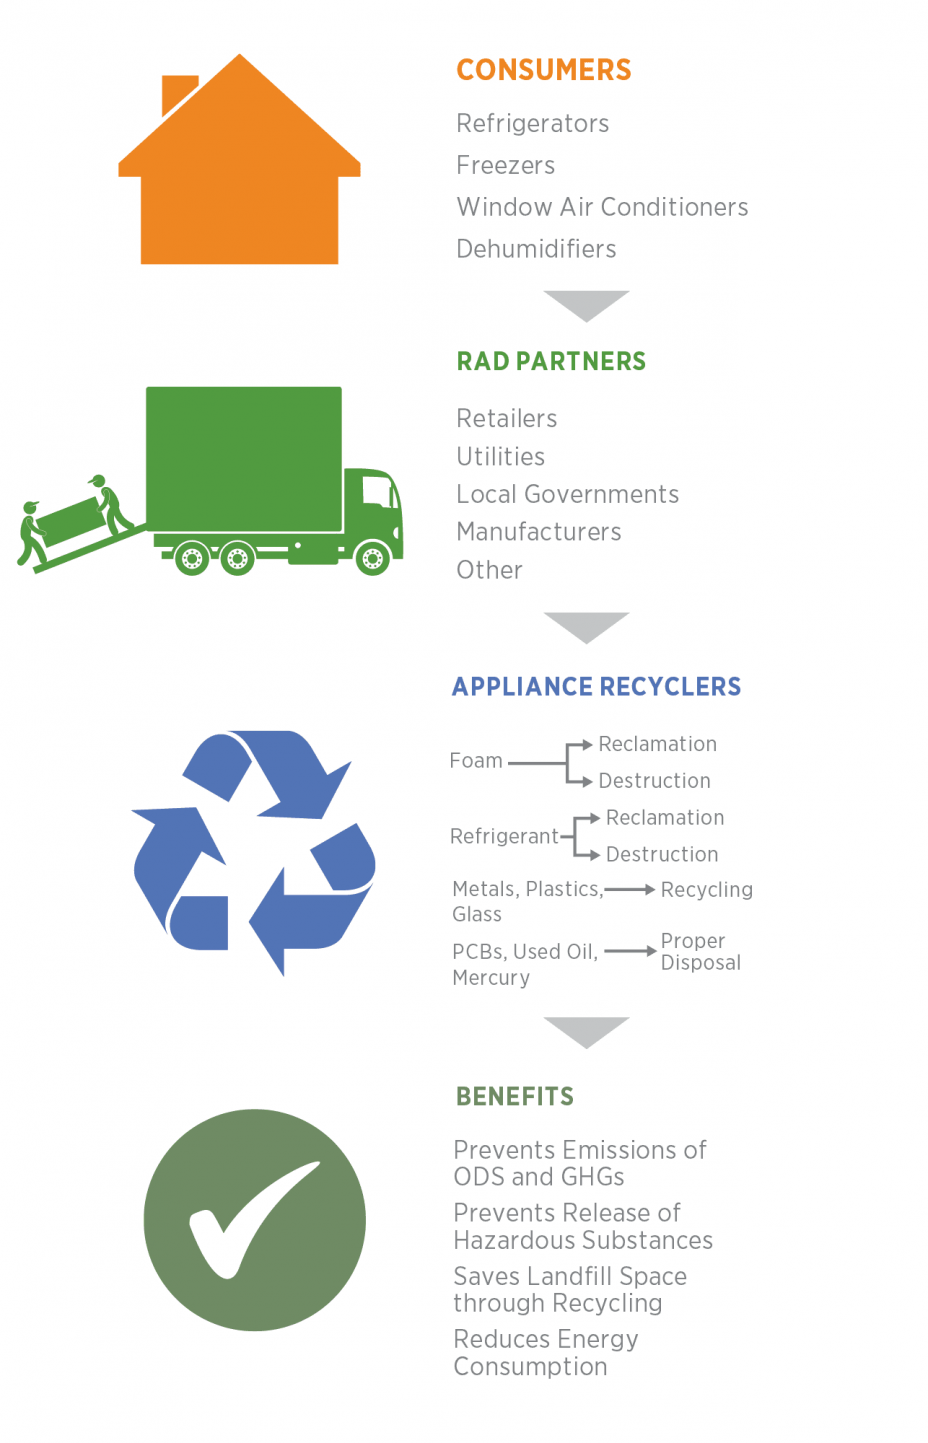 Consumers, Partners, Appliance Recyclers, Benefits